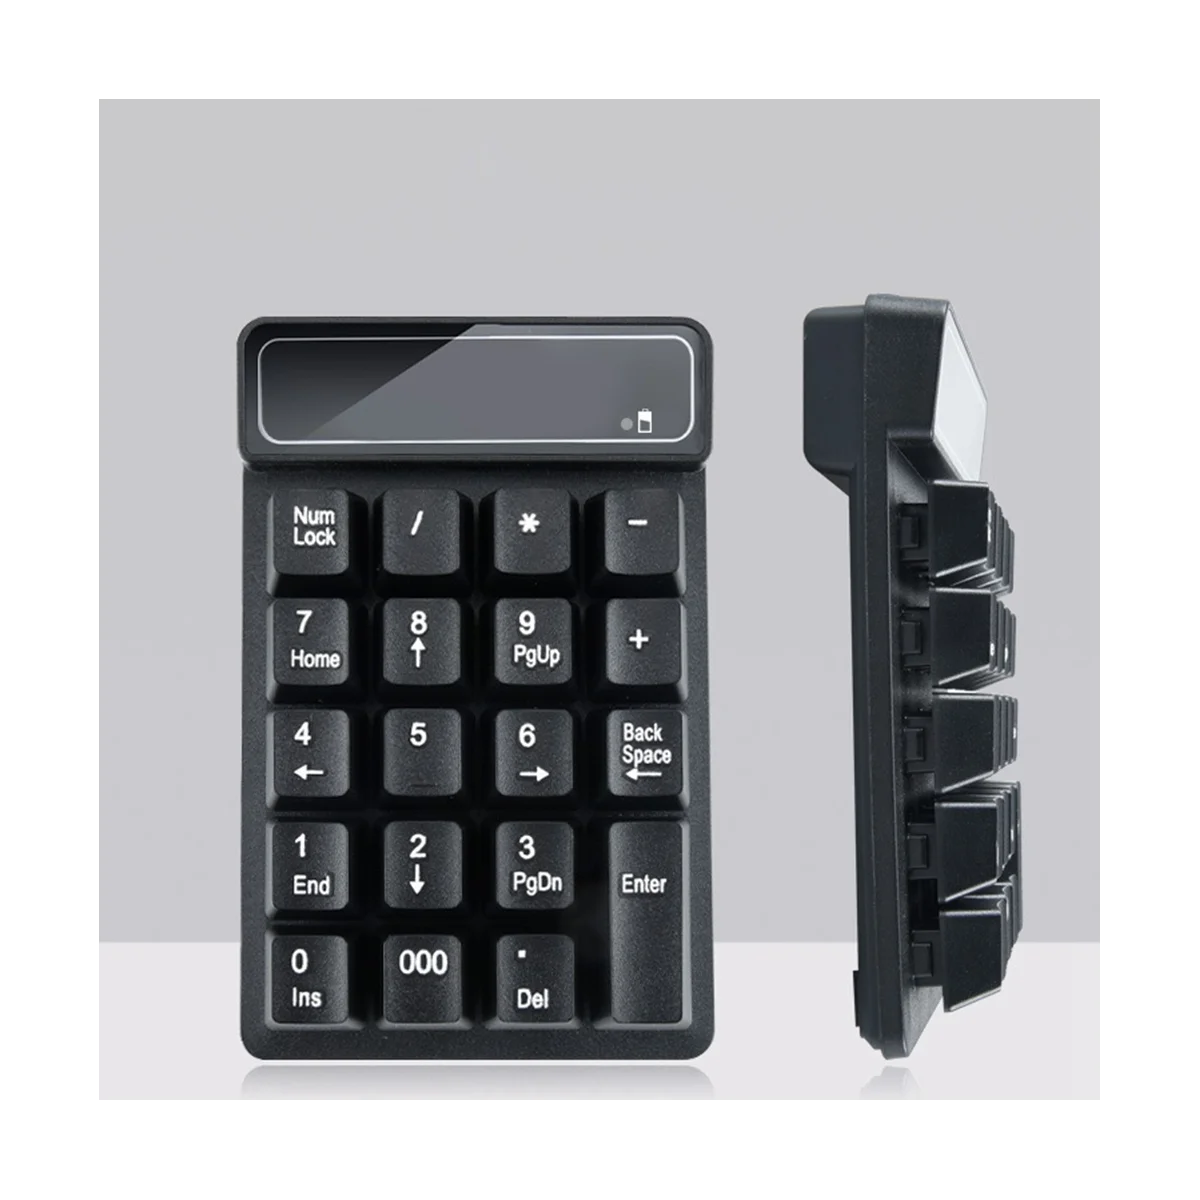 

2.4GHz Wireless Keyboard Mini USB Numeric Keypad 19 Keys Number Pad Numpad Receiver for Accounting Laptop PC Computer(A)